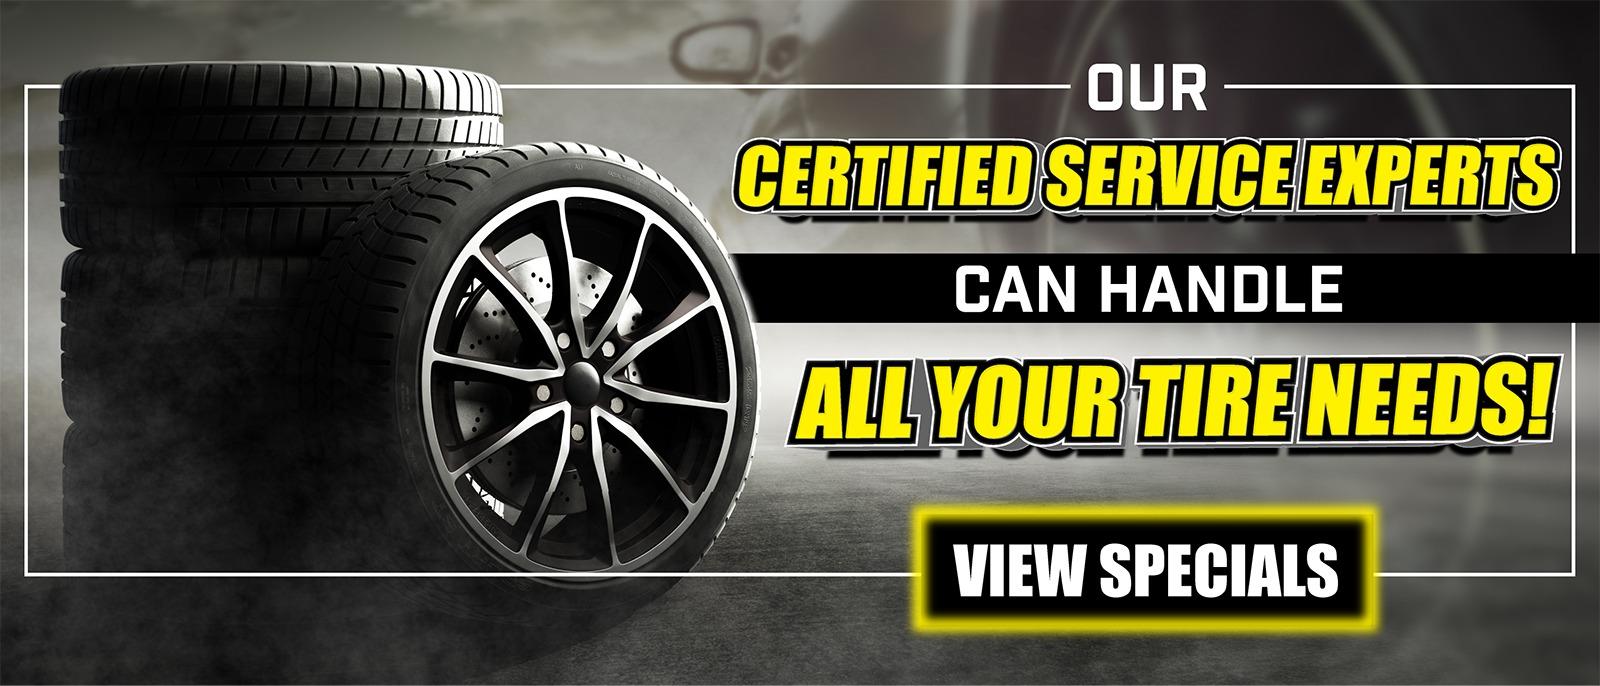 OUR CERTIFIED SERVICE EXPERTS CAN HANDLE ALL OF YOUR TIRE NEEDS AT LANCASTER MOTOR COMPANY